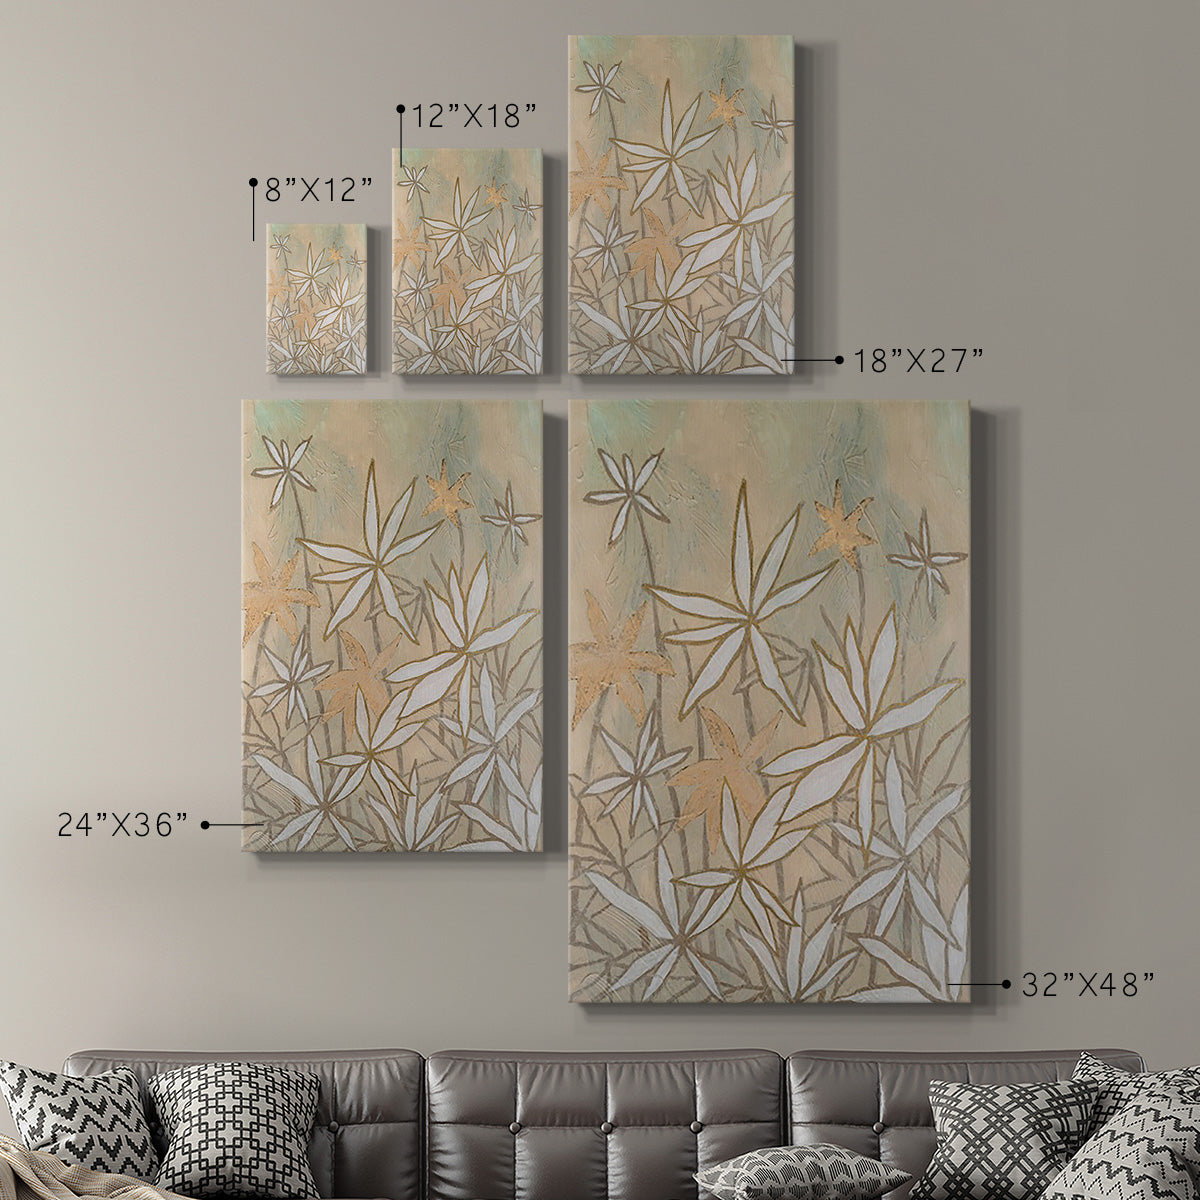 Embellished Starburst Bloom I Premium Gallery Wrapped Canvas - Ready to Hang